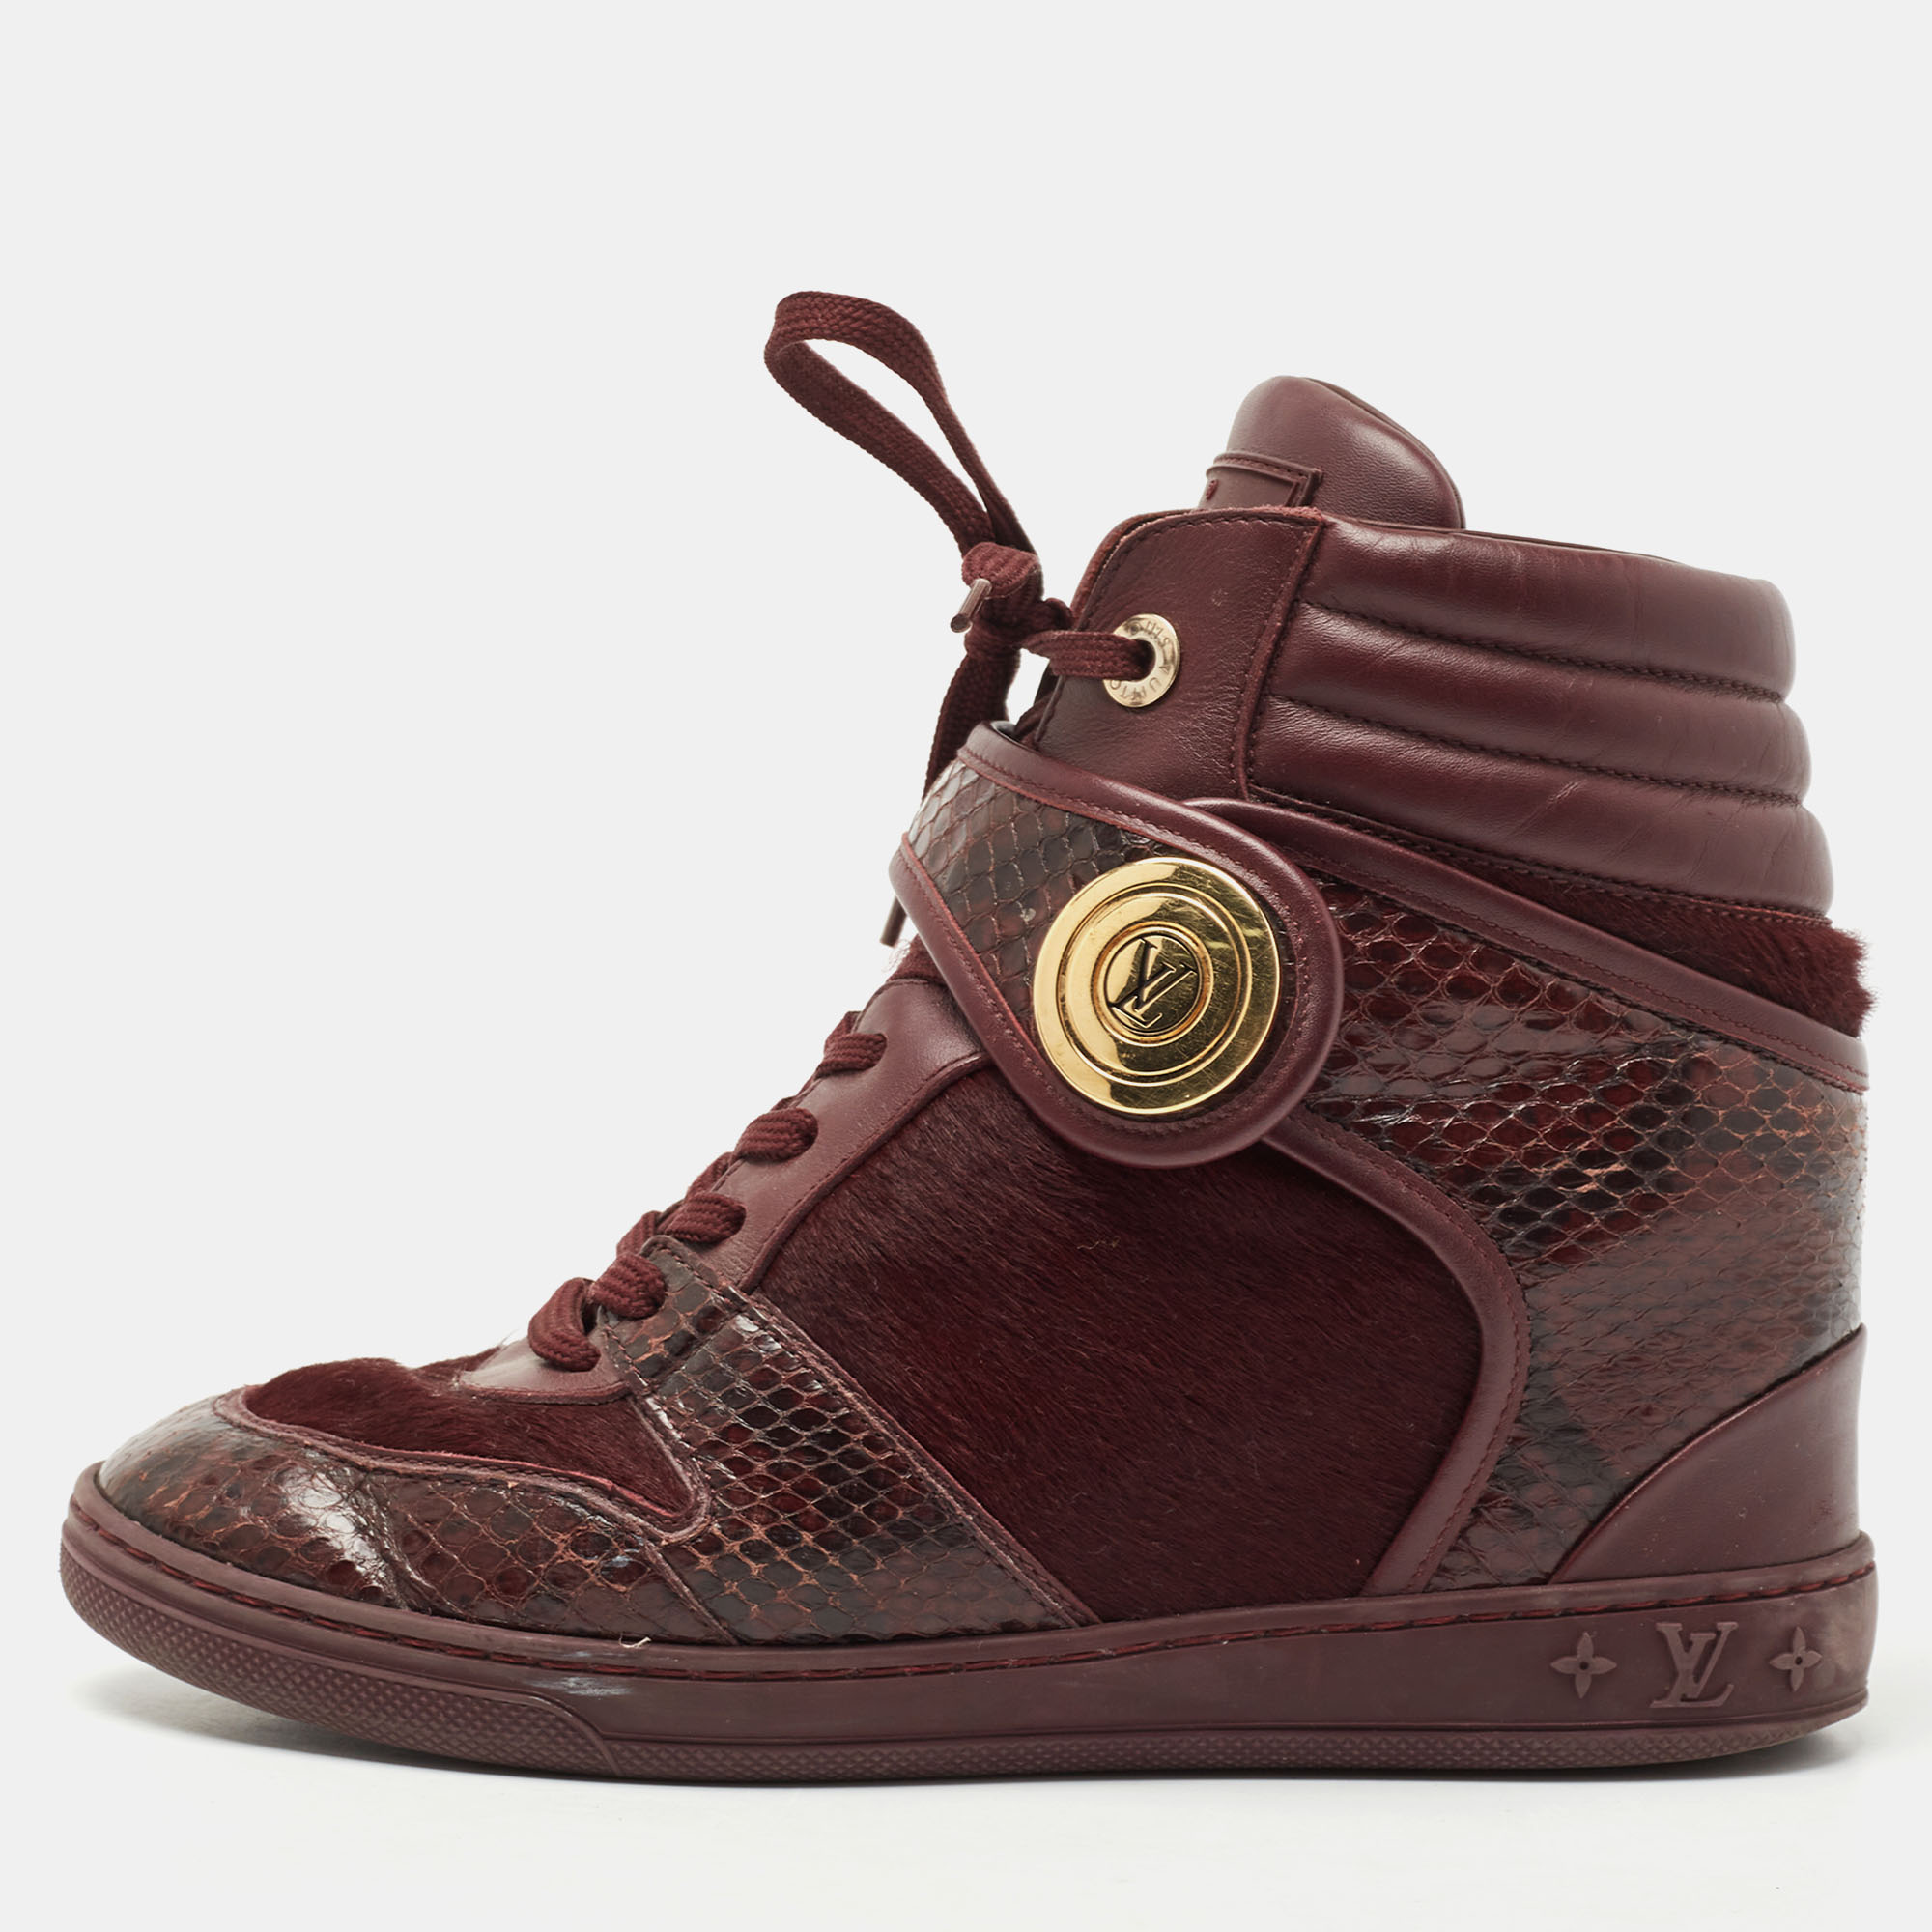 

Louis Vuitton Burgundy Calf Hair and Python Leather High Top Sneakers Size